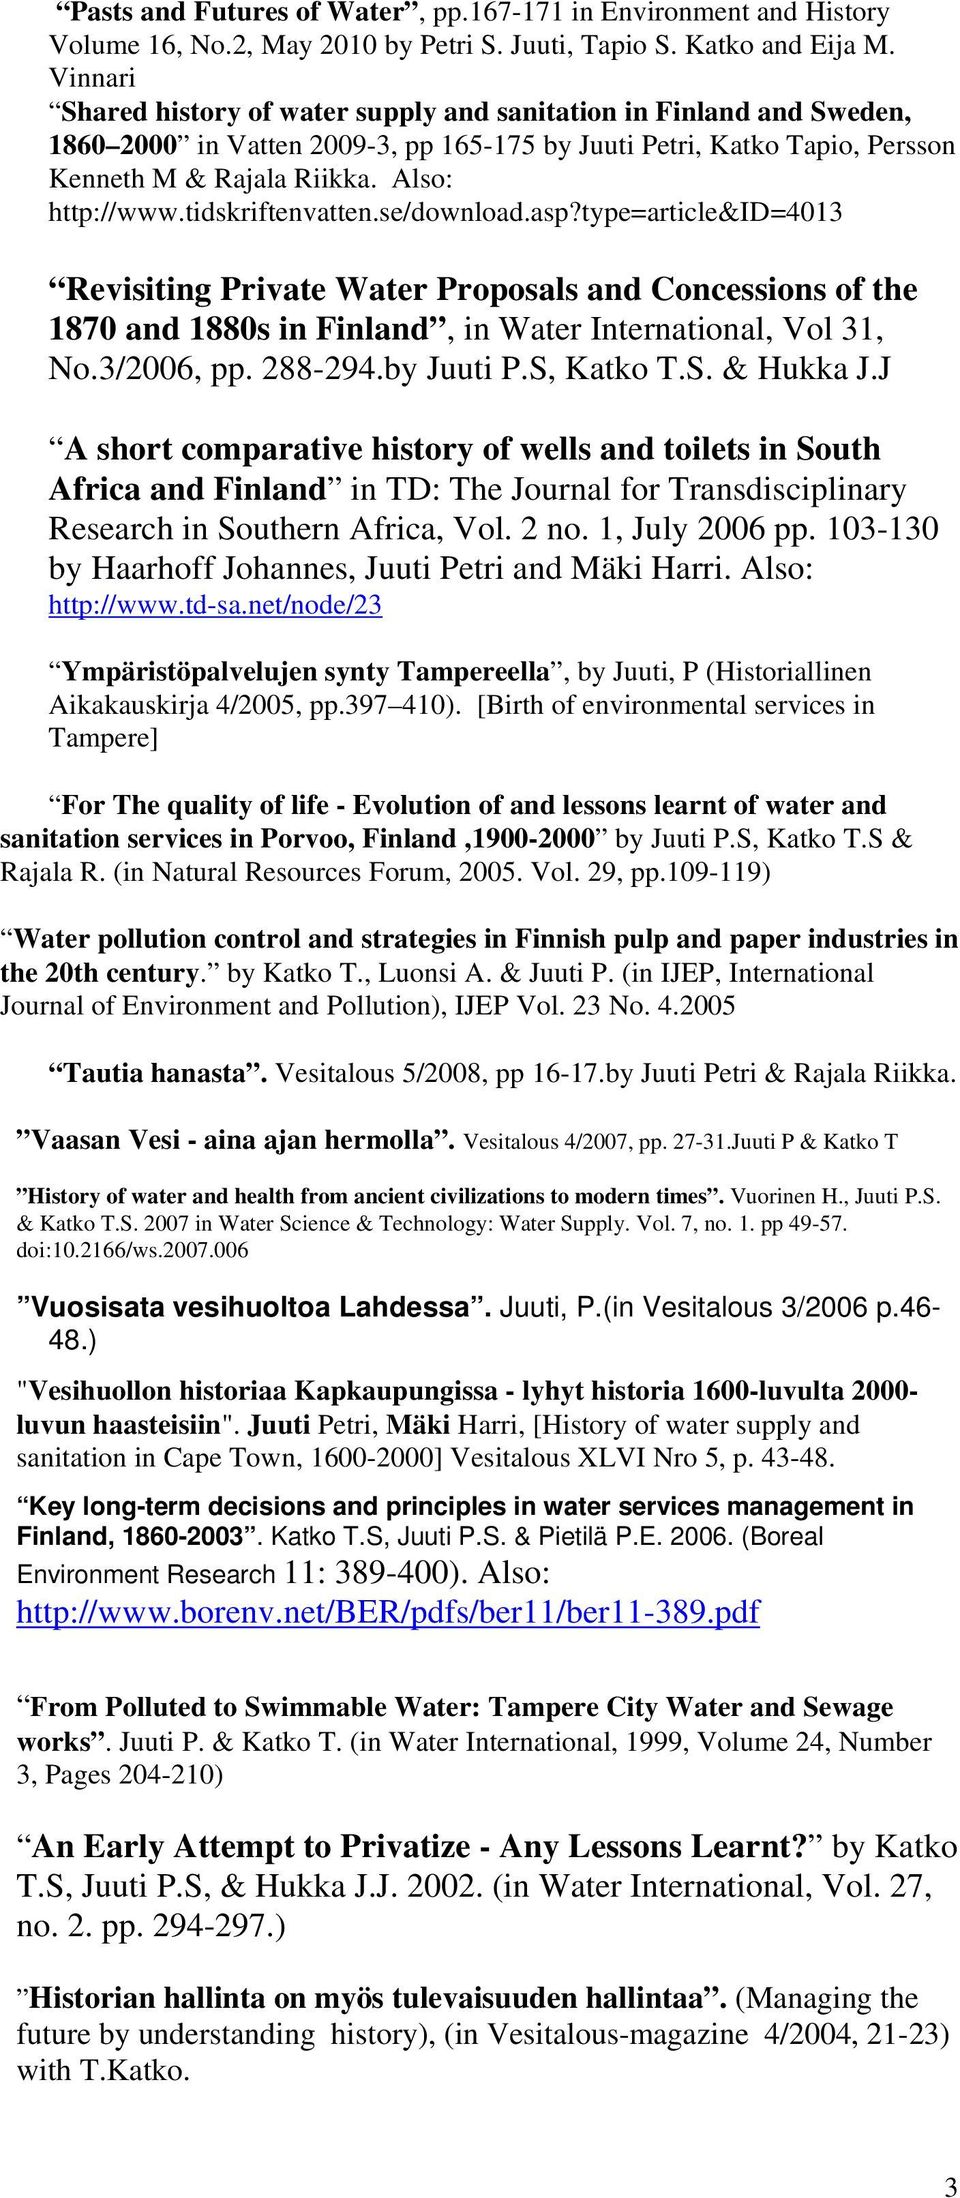 tidskriftenvatten.se/download.asp?type=article&id=4013 Revisiting Private Water Proposals and Concessions of the 1870 and 1880s in Finland, in Water International, Vol 31, No.3/2006, pp. 288-294.